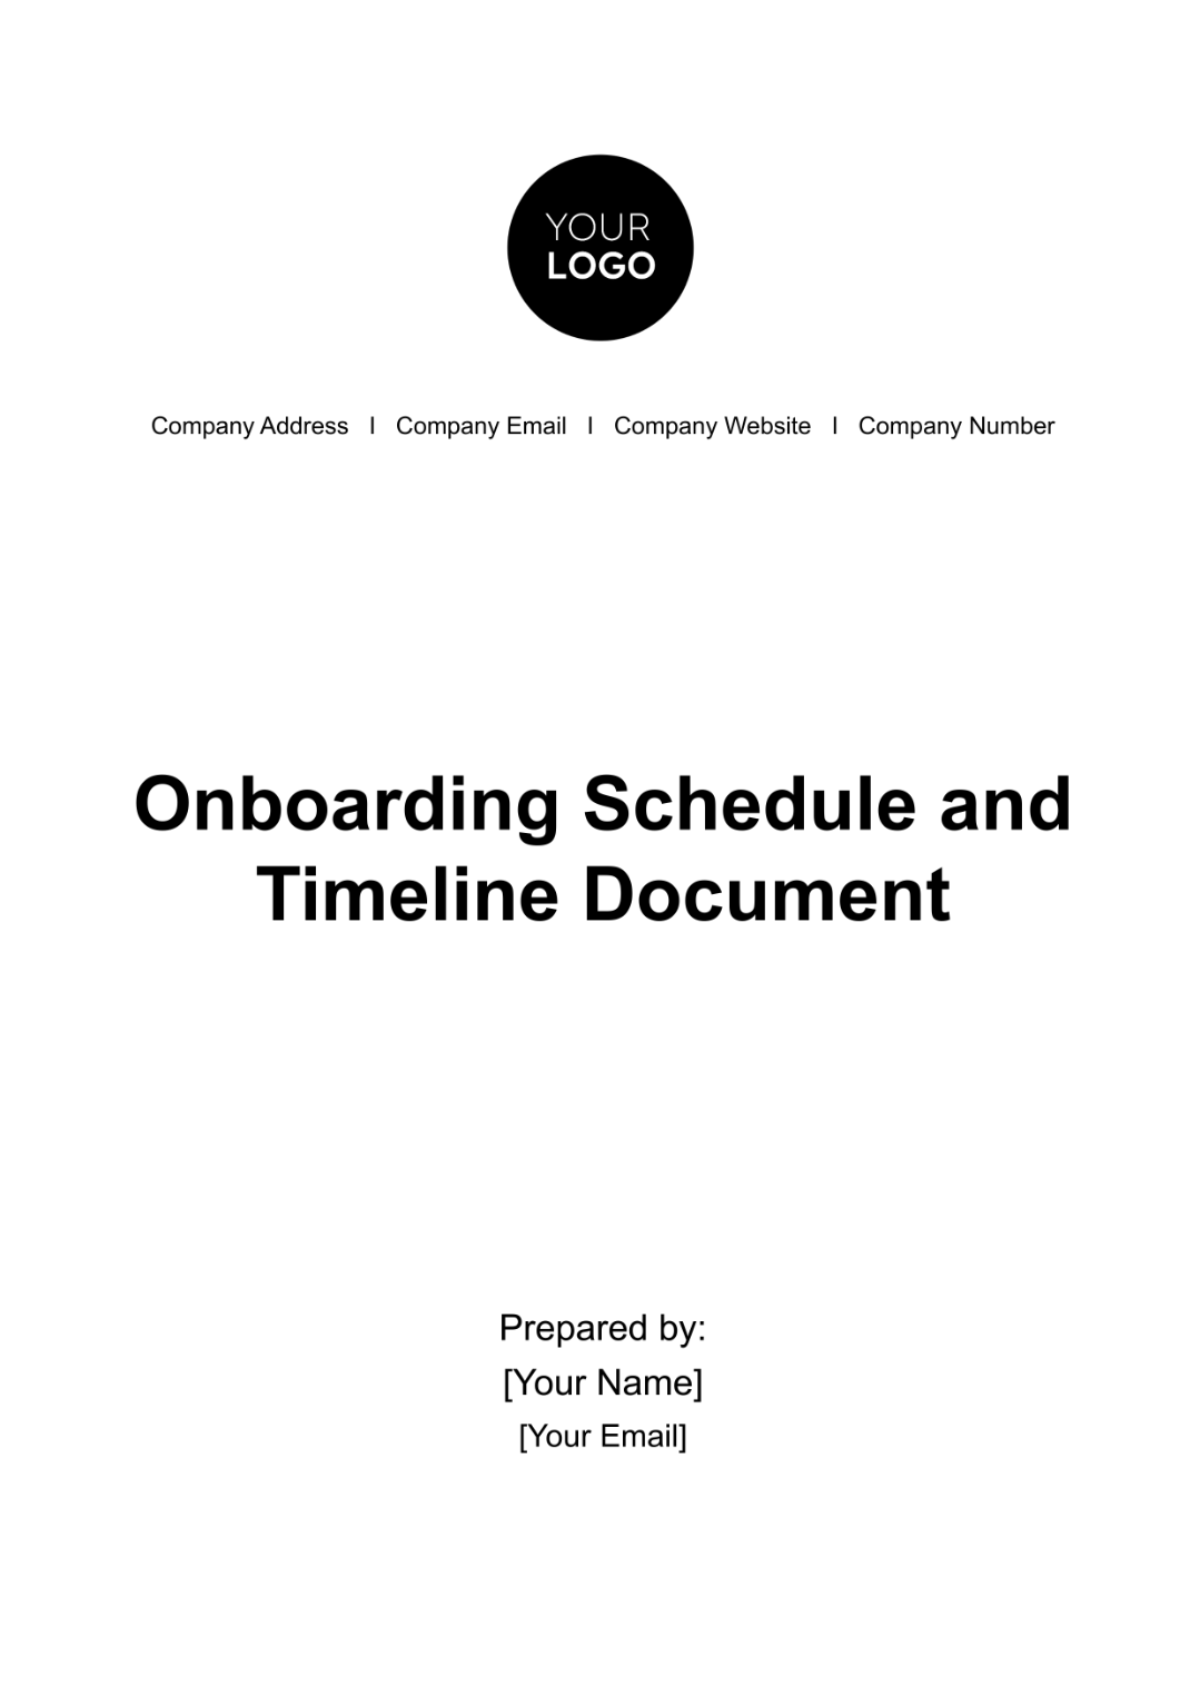 Free Onboarding Schedule & Timeline Document HR Template